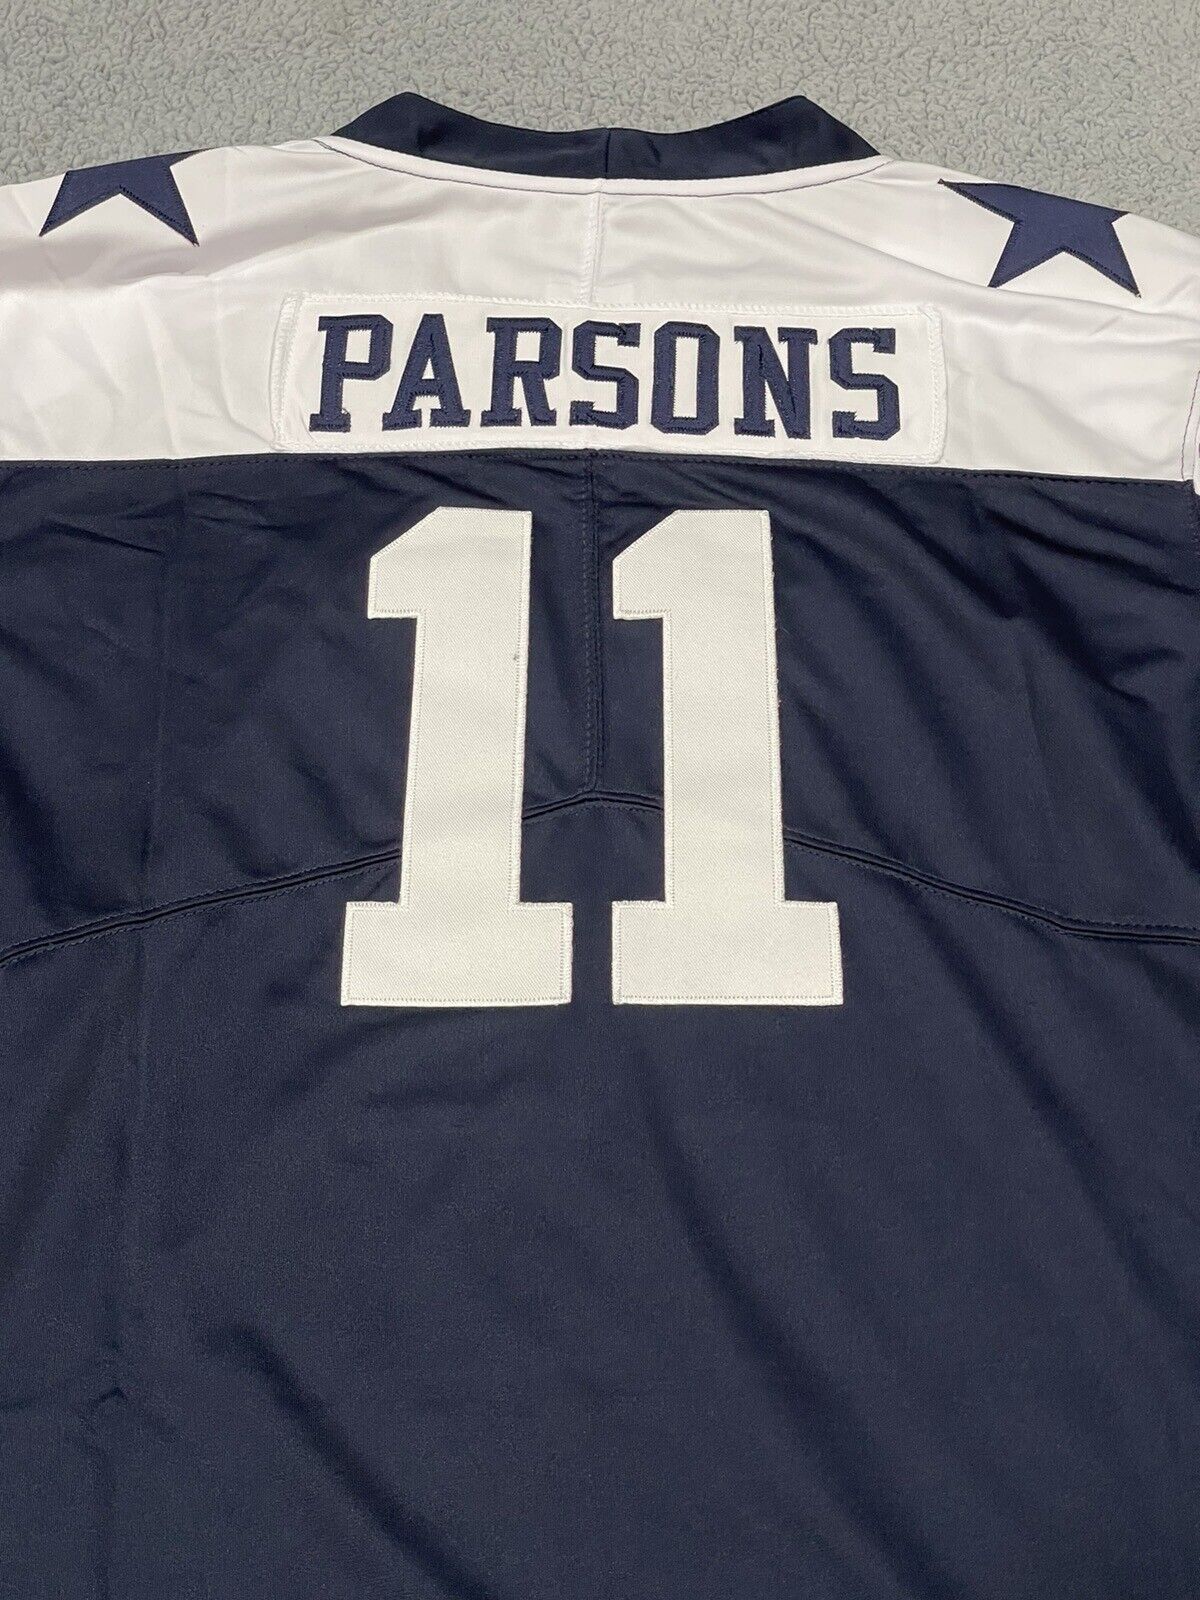 Dallas Cowboys Micah Parsons Jersey Adult Medium Blue White Stitched Football 11